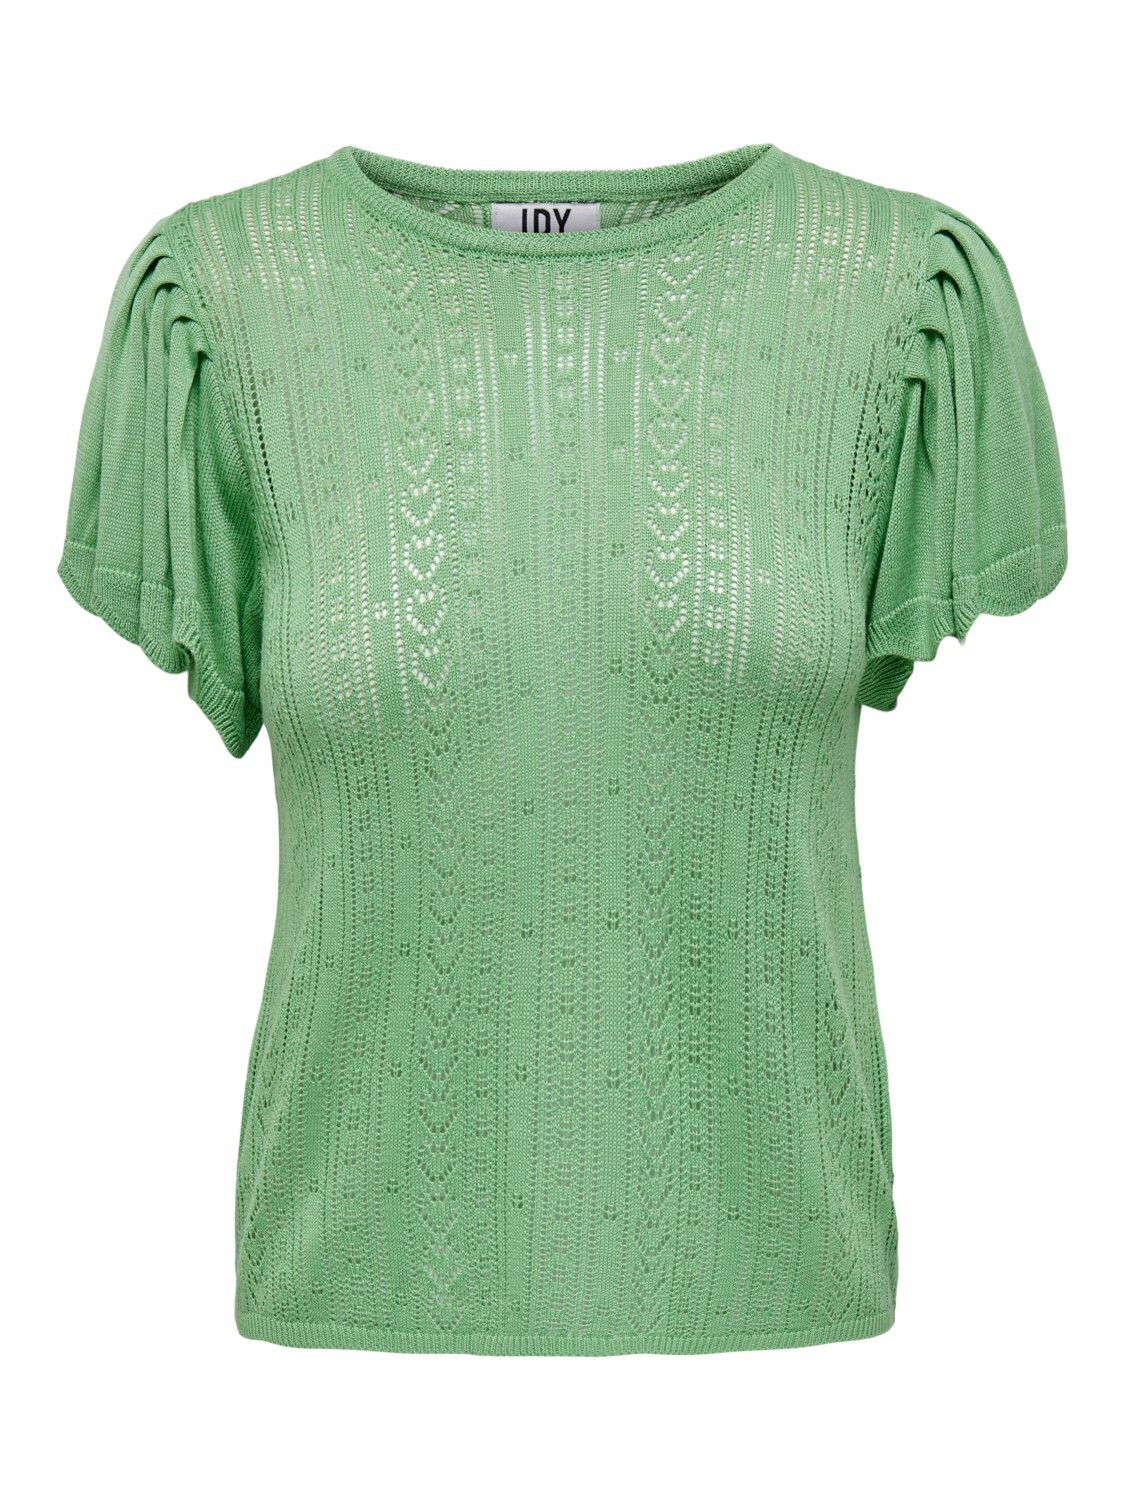 Top knitted - SOLIS - absinthe green